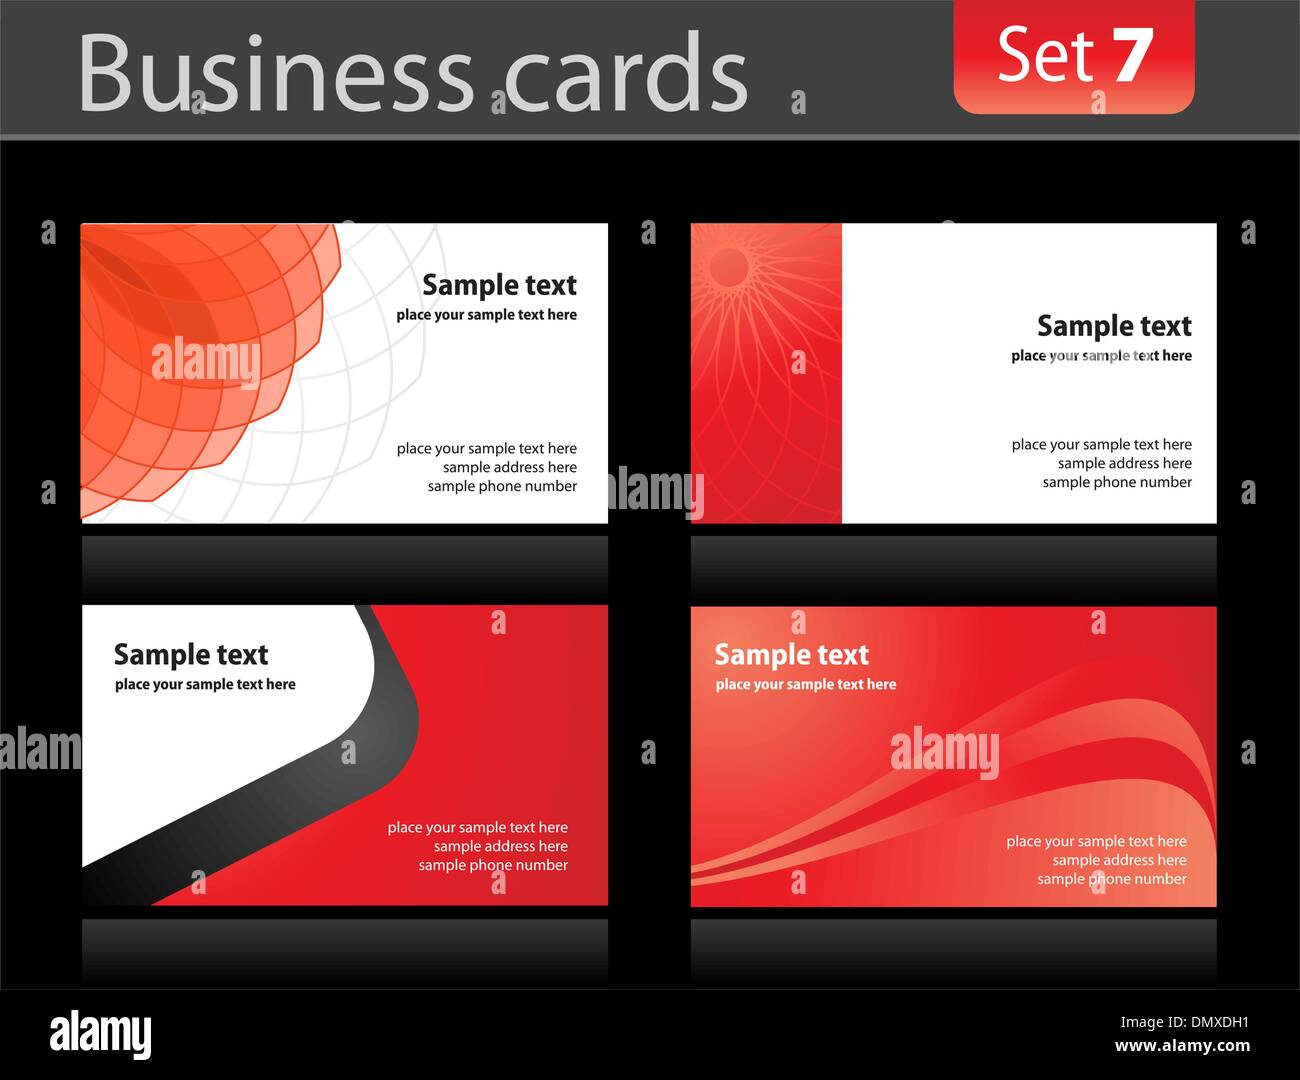 Business cards templates Stock Vector